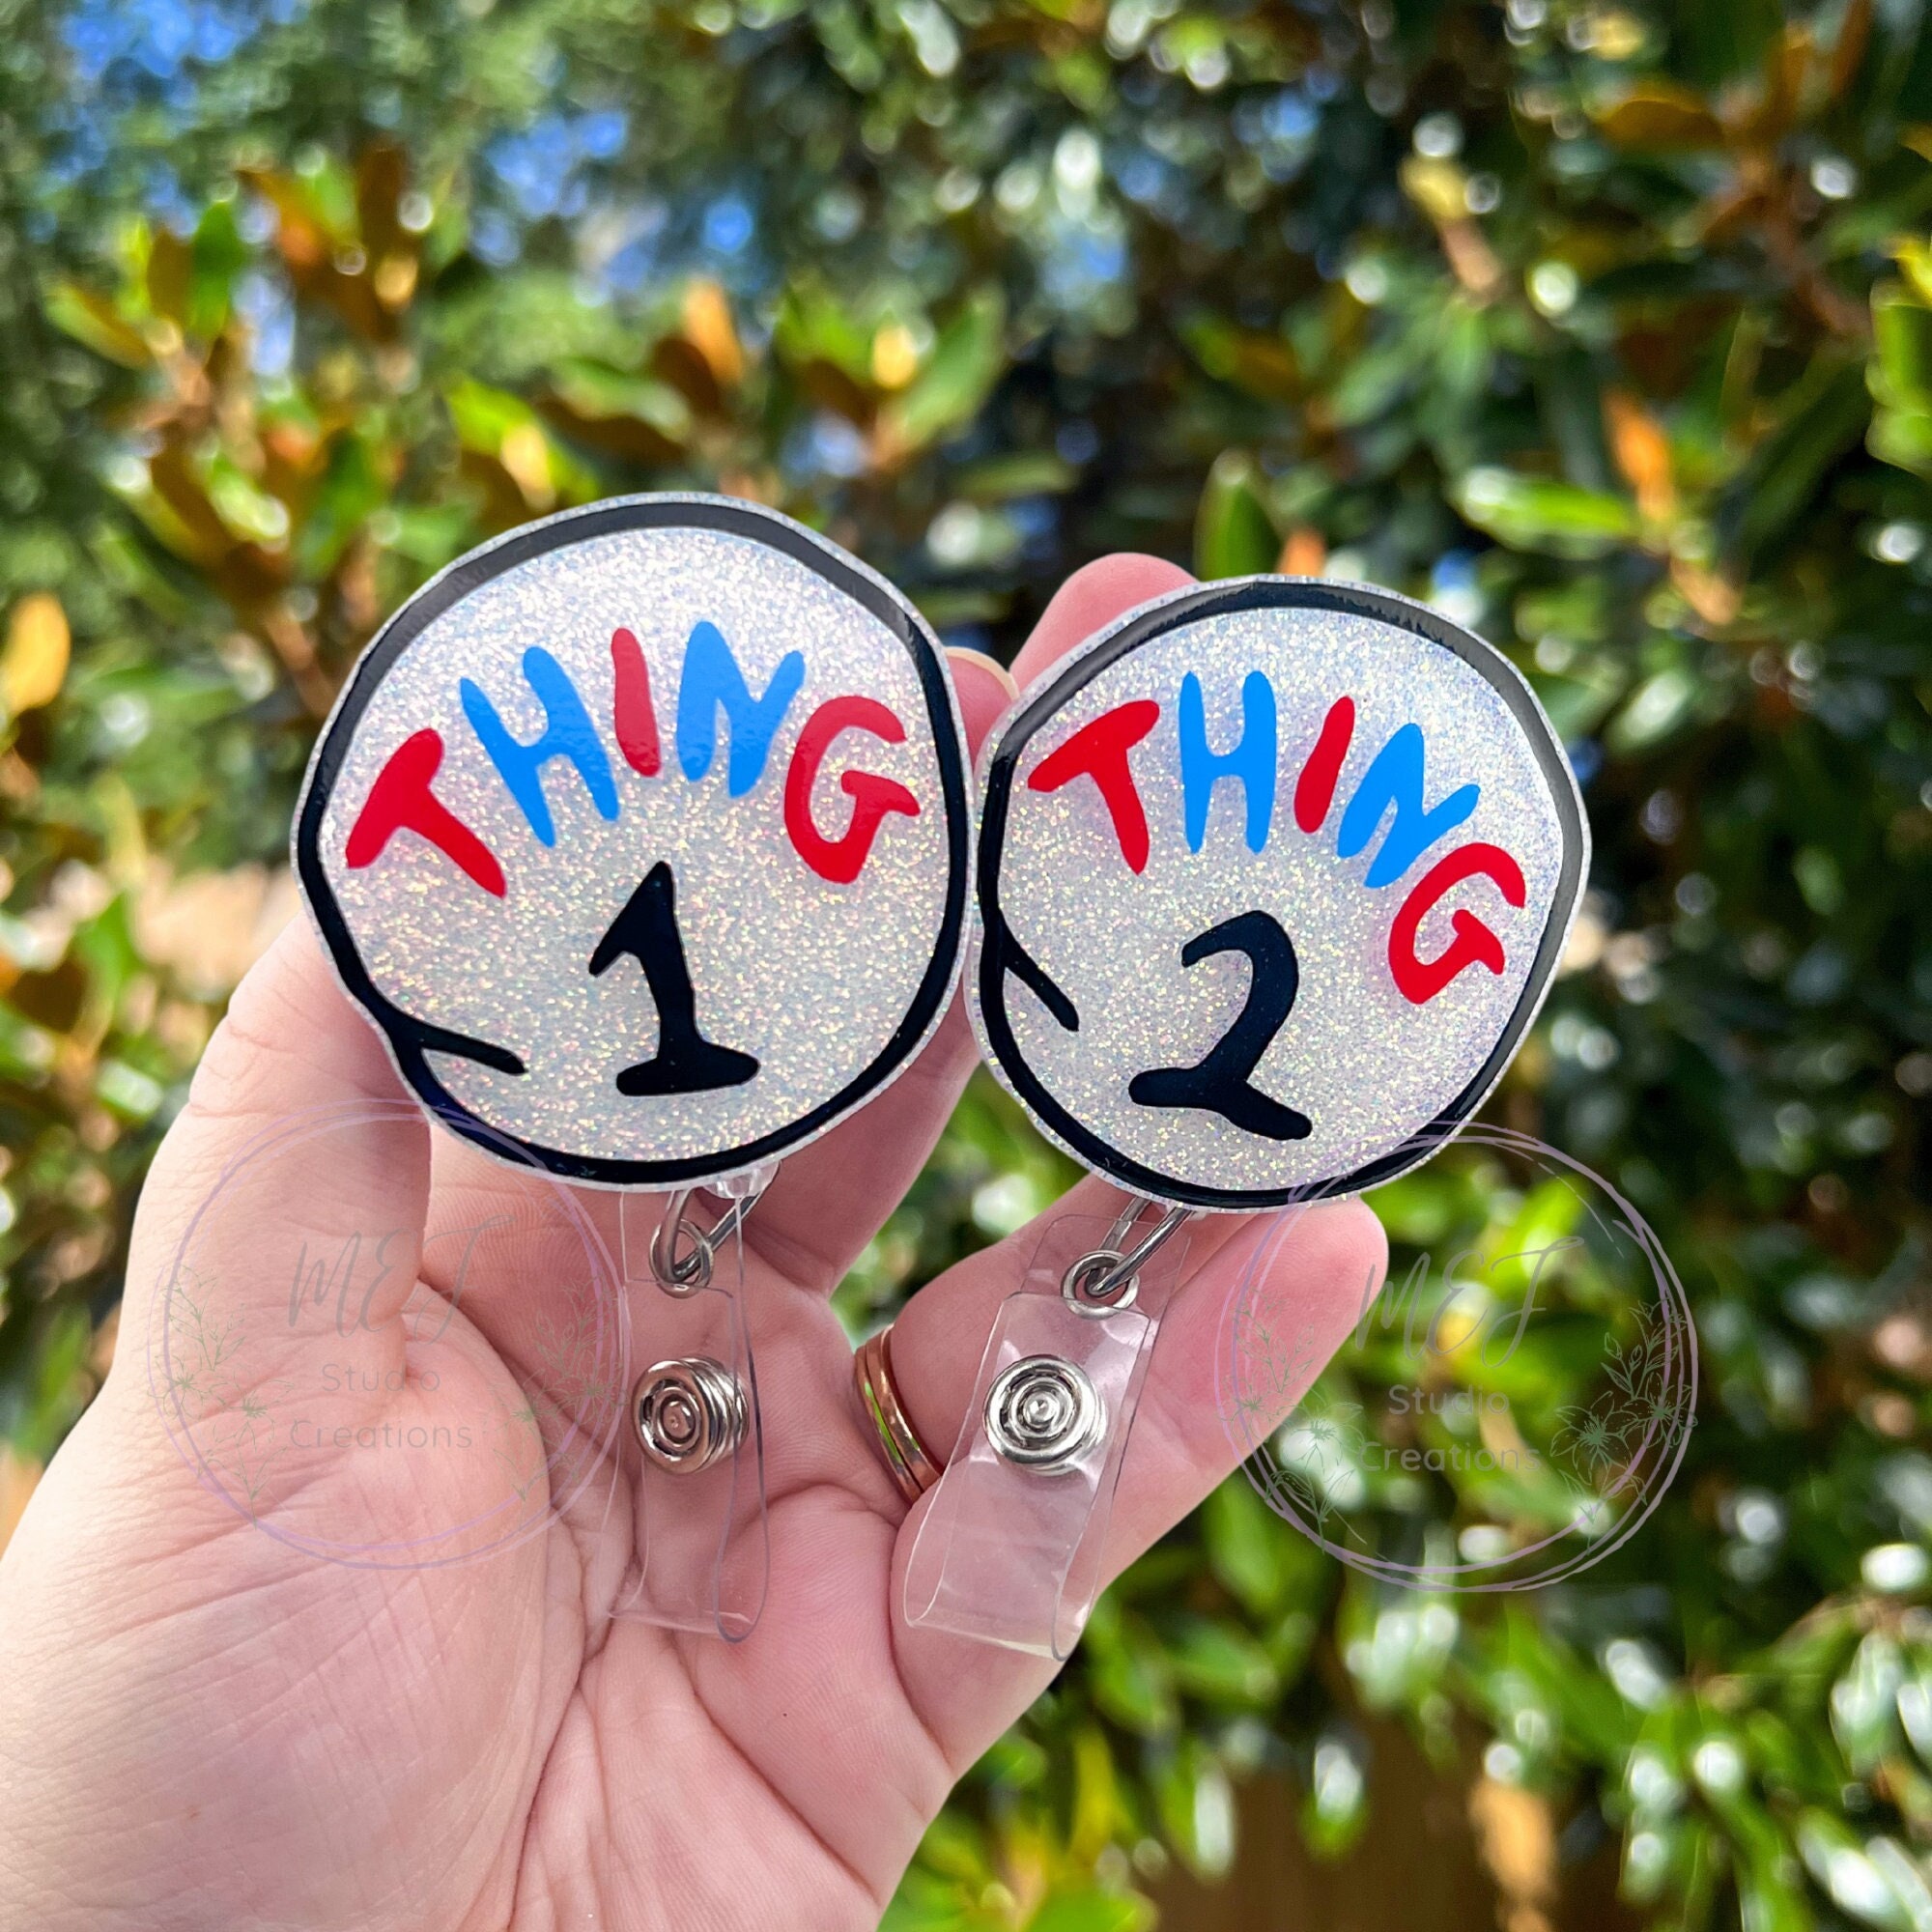 Thing 1 and Thing 2 Glitter Interchangeable Badge Reel | White Thing 1 and  2 Glitter ID Holder | BFF Badge Reels | Cute Healthcare BFF Gift